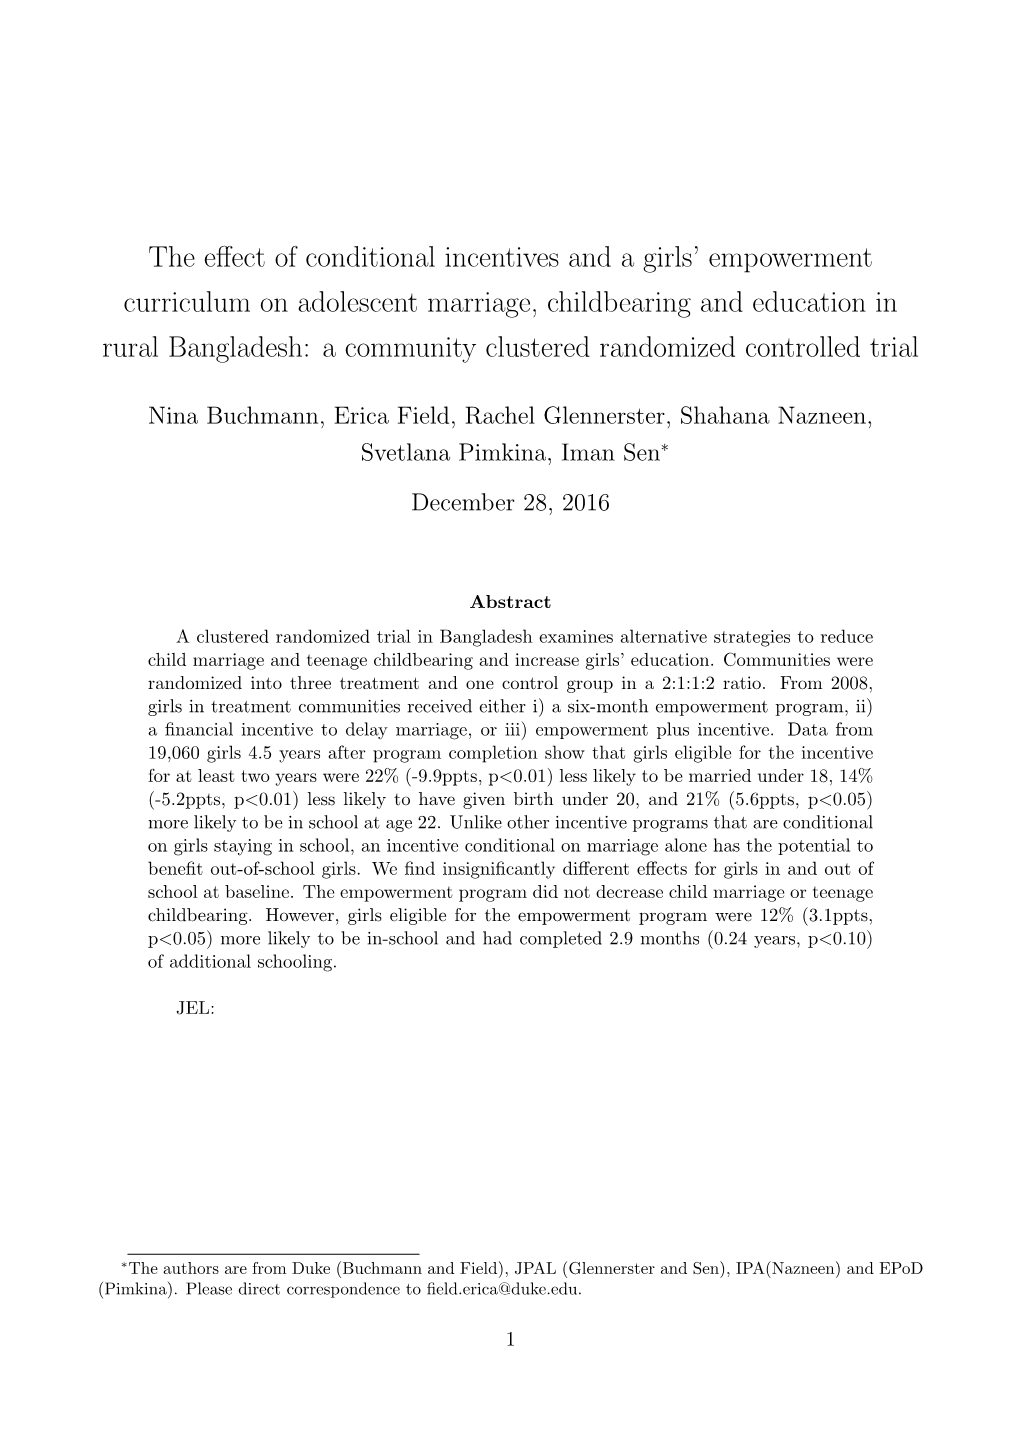 The Effect of Conditional Incentives and a Girls' Empowerment